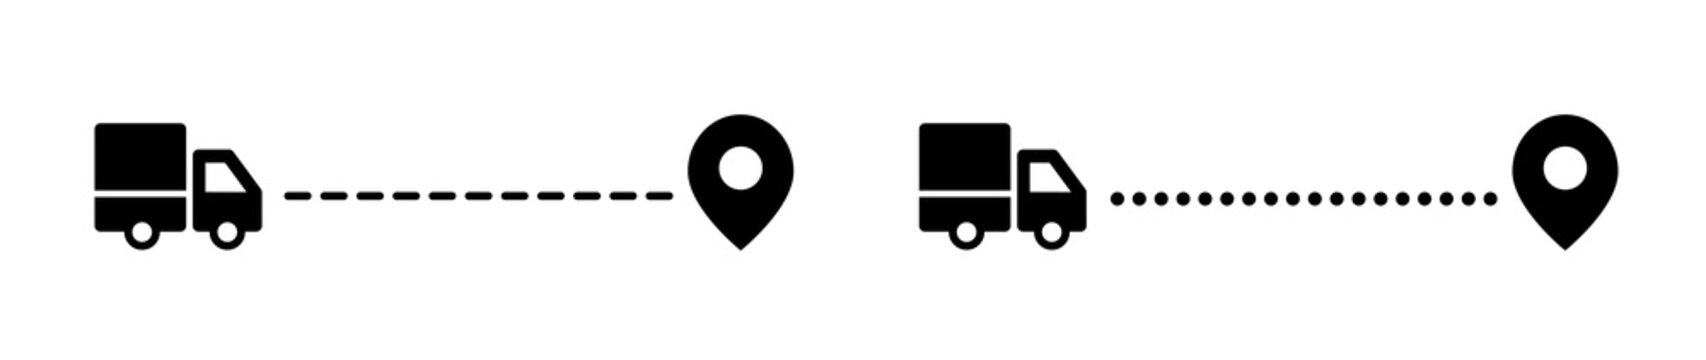 Logistics icon. Path, logistics. Delivery black icon. Delivery concept. Vector icons isolated on a transparent background.